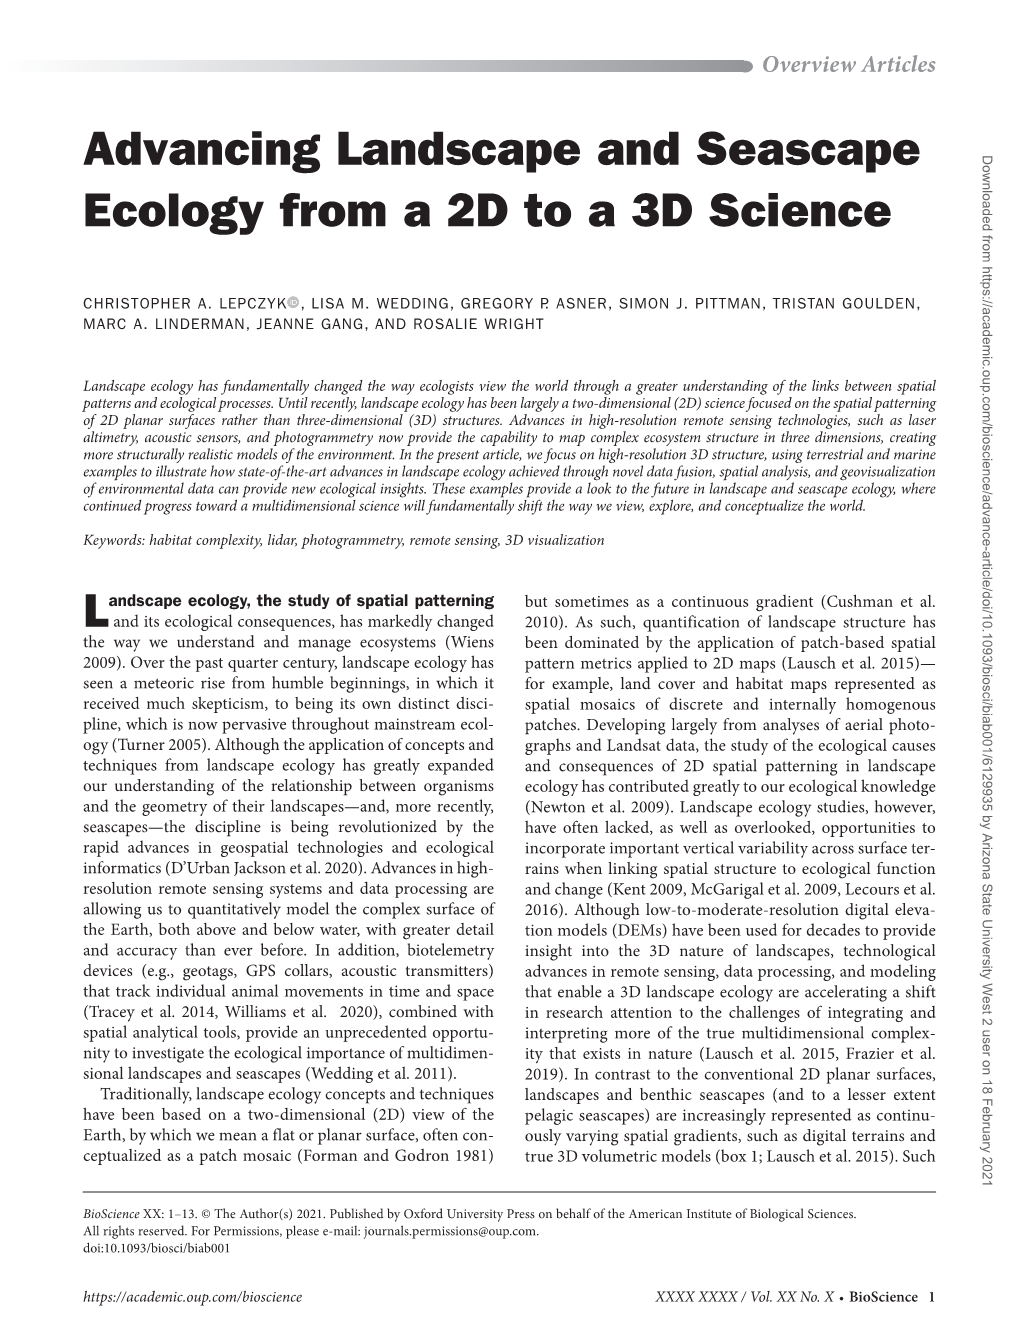 Advancing Landscape and Seascape Ecology from a 2D to a 3D Science